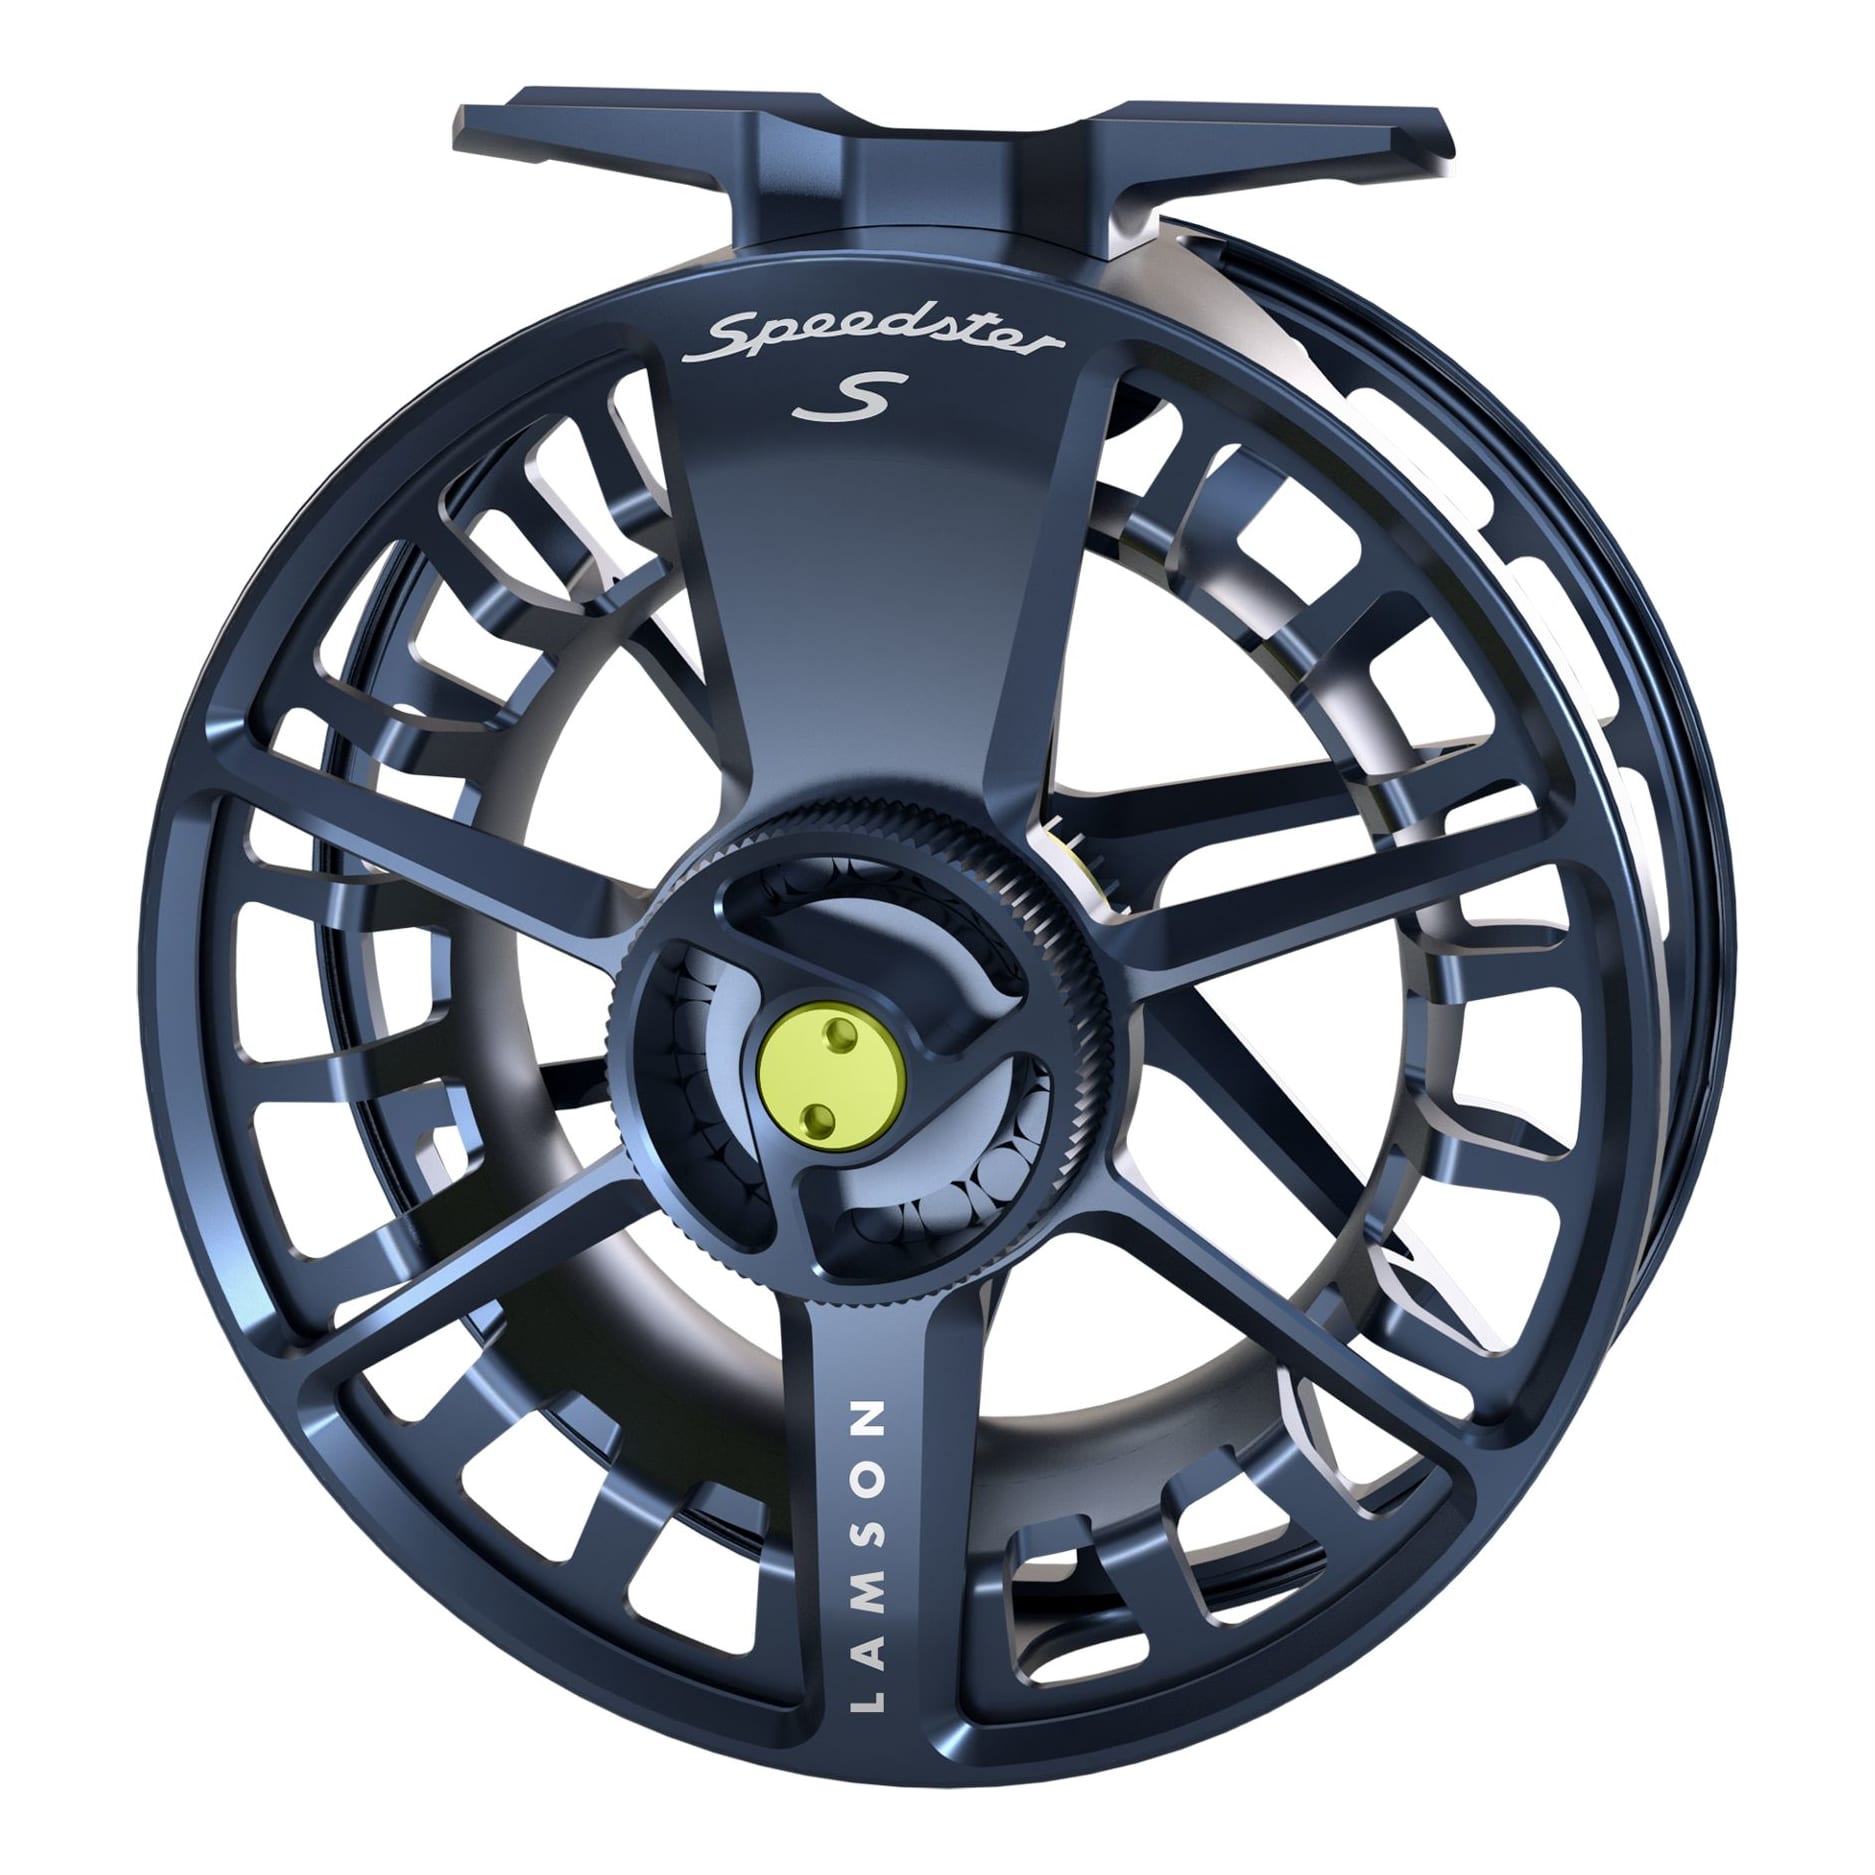 TEMPLE FORK OUTFITTERS BVK SD II Fly Reel TFR-BVK-SD-II